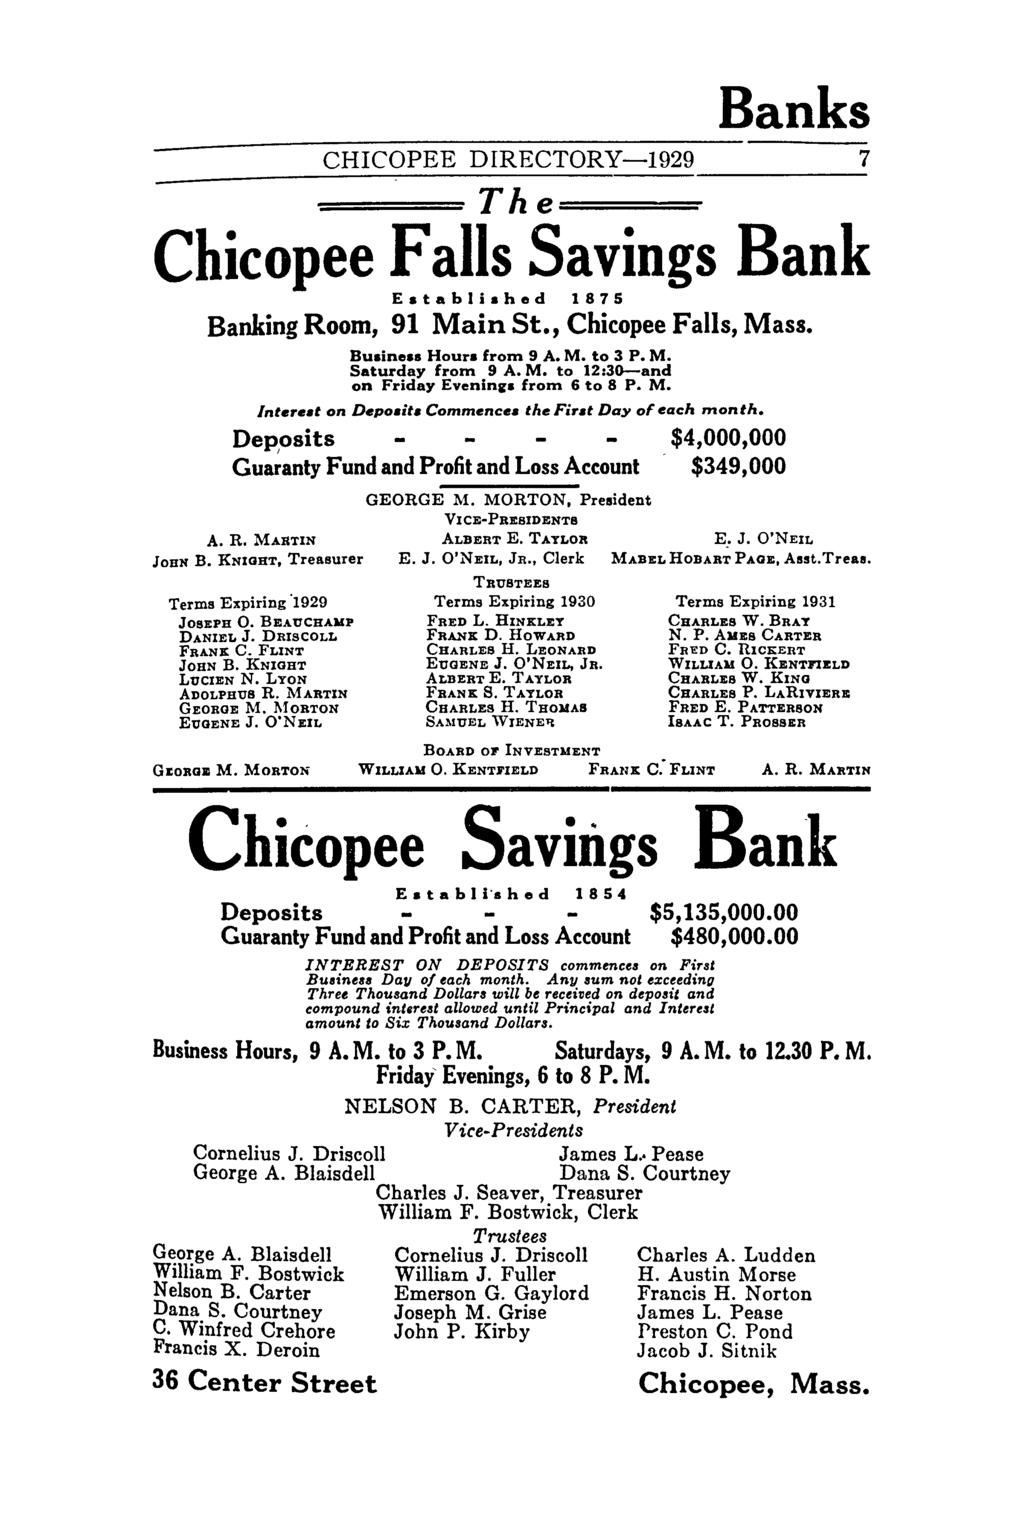 Banks CHICOPEE DIRECTORY-1929 7 The===- Chicopee Savings Bank Established 1875 Banking Room, 91 Main St., Chicopee, Mass. Busines. Hours froltl 9 A. M. to 3 P. M. Saturday froltl 9 A. M. to 12:3D-and on Friday EVeninK's froltl 6 to 8 P.